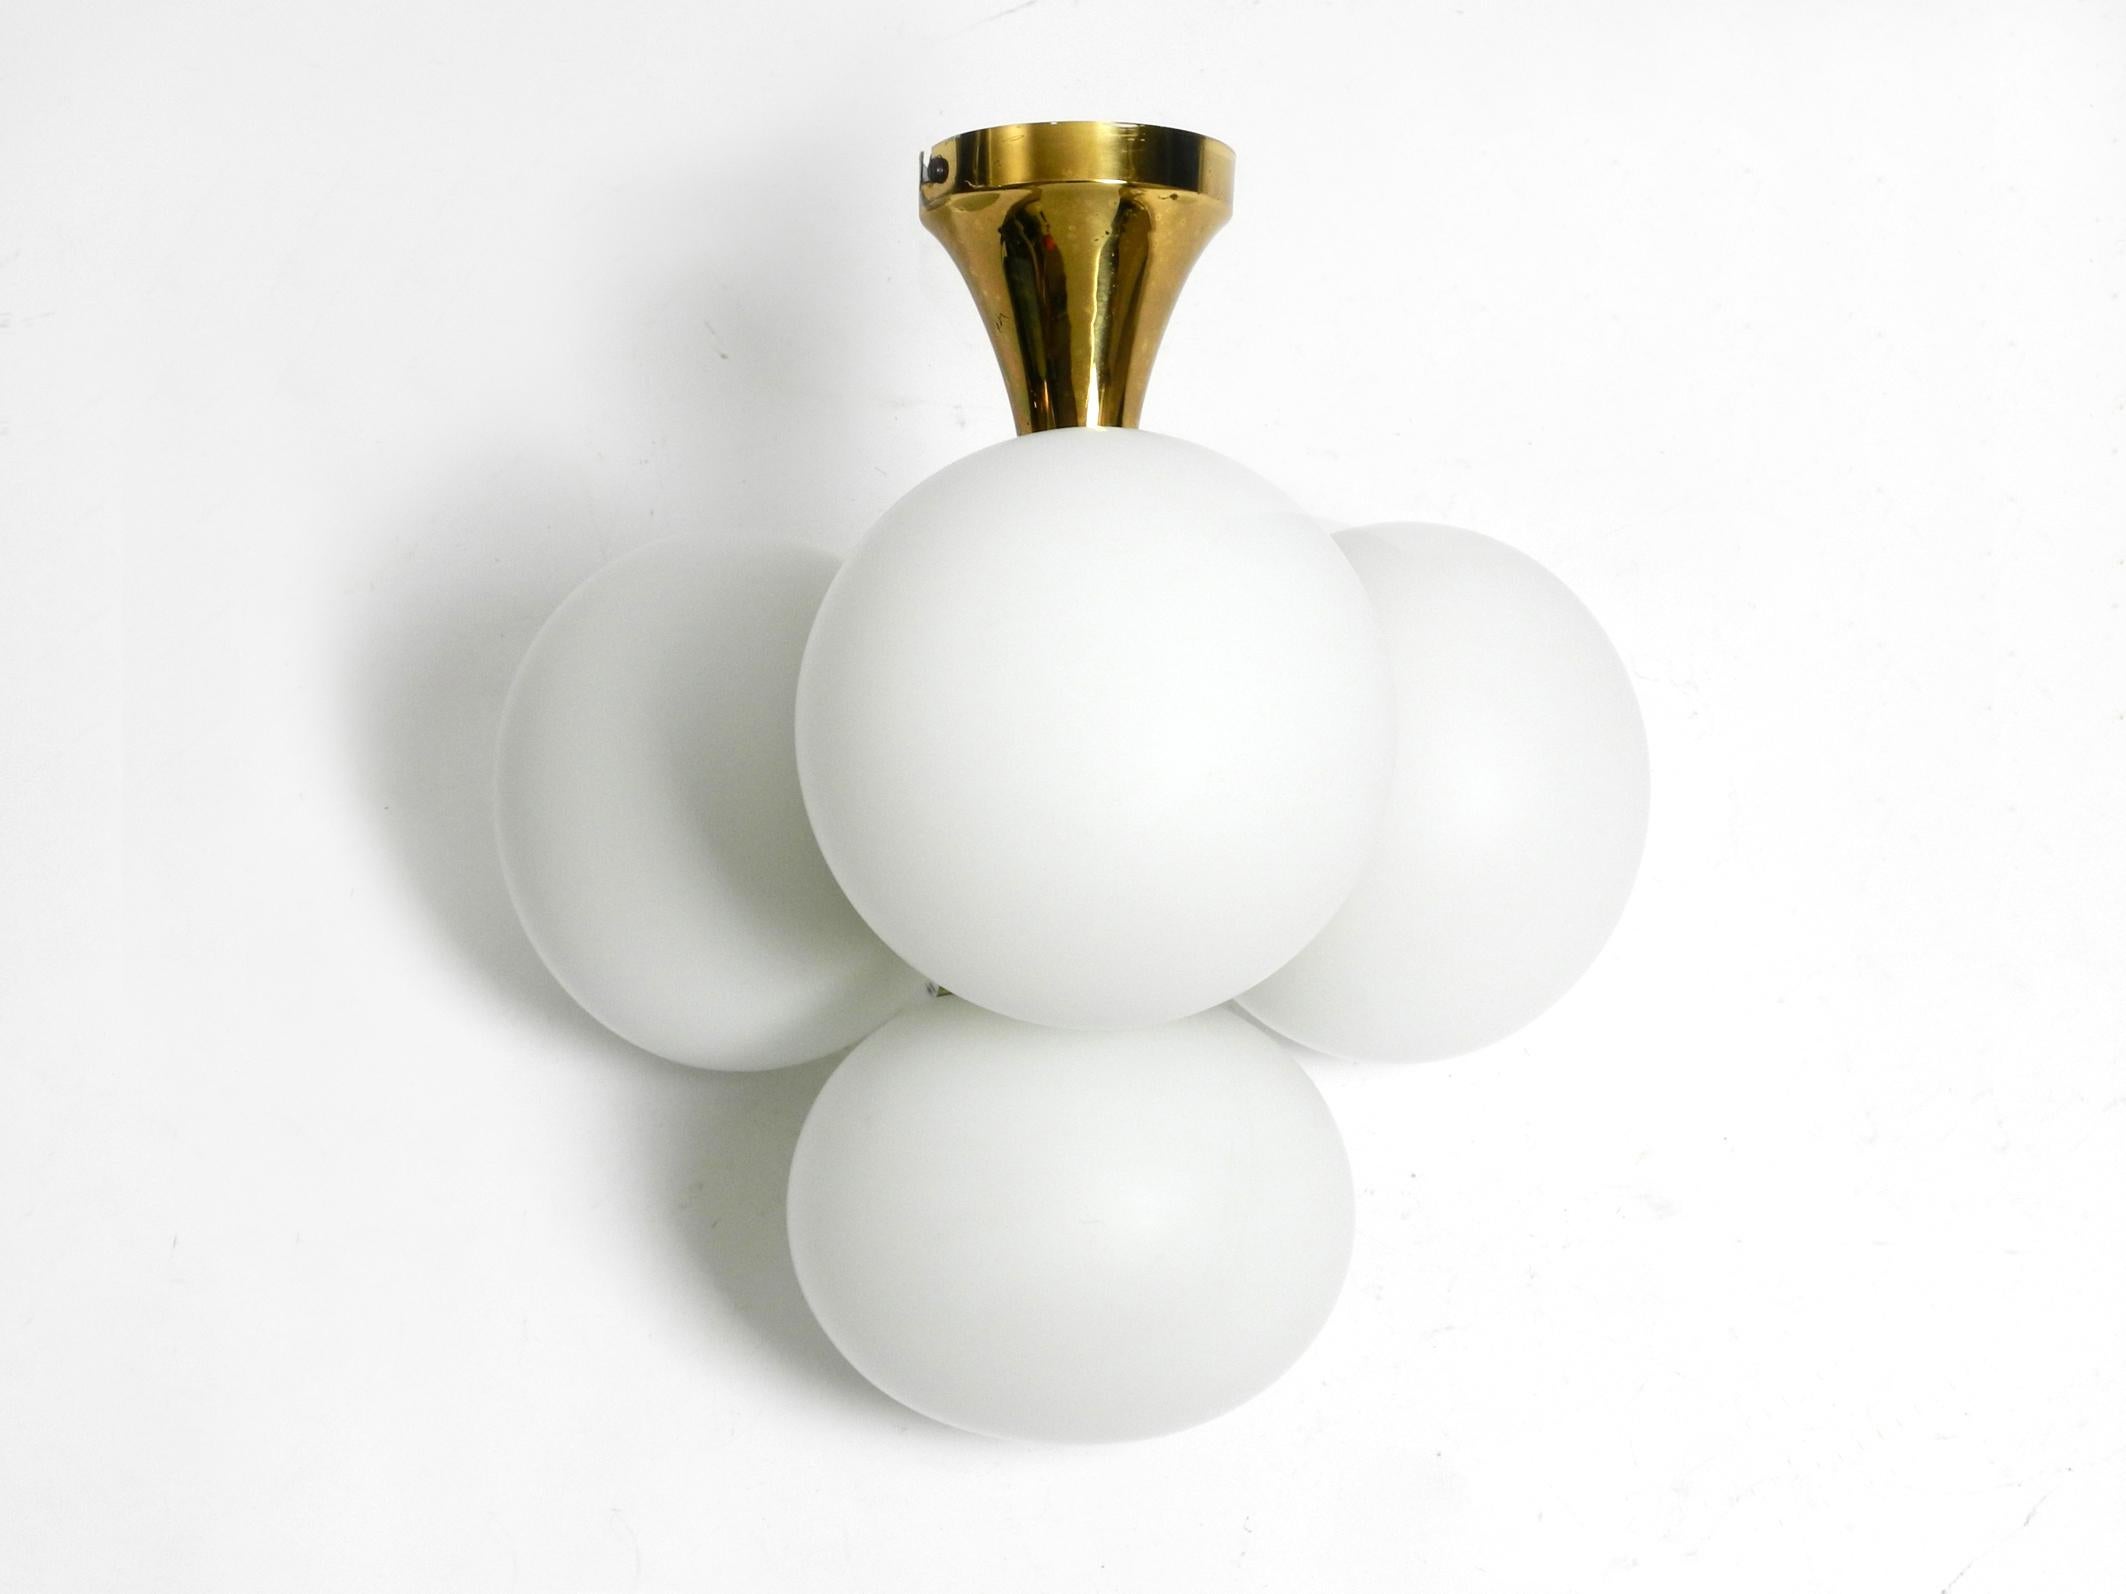 60s Space Age Kaiser Leuchten brass ceiling lamp with 4 white oval glass spheres In Good Condition For Sale In München, DE